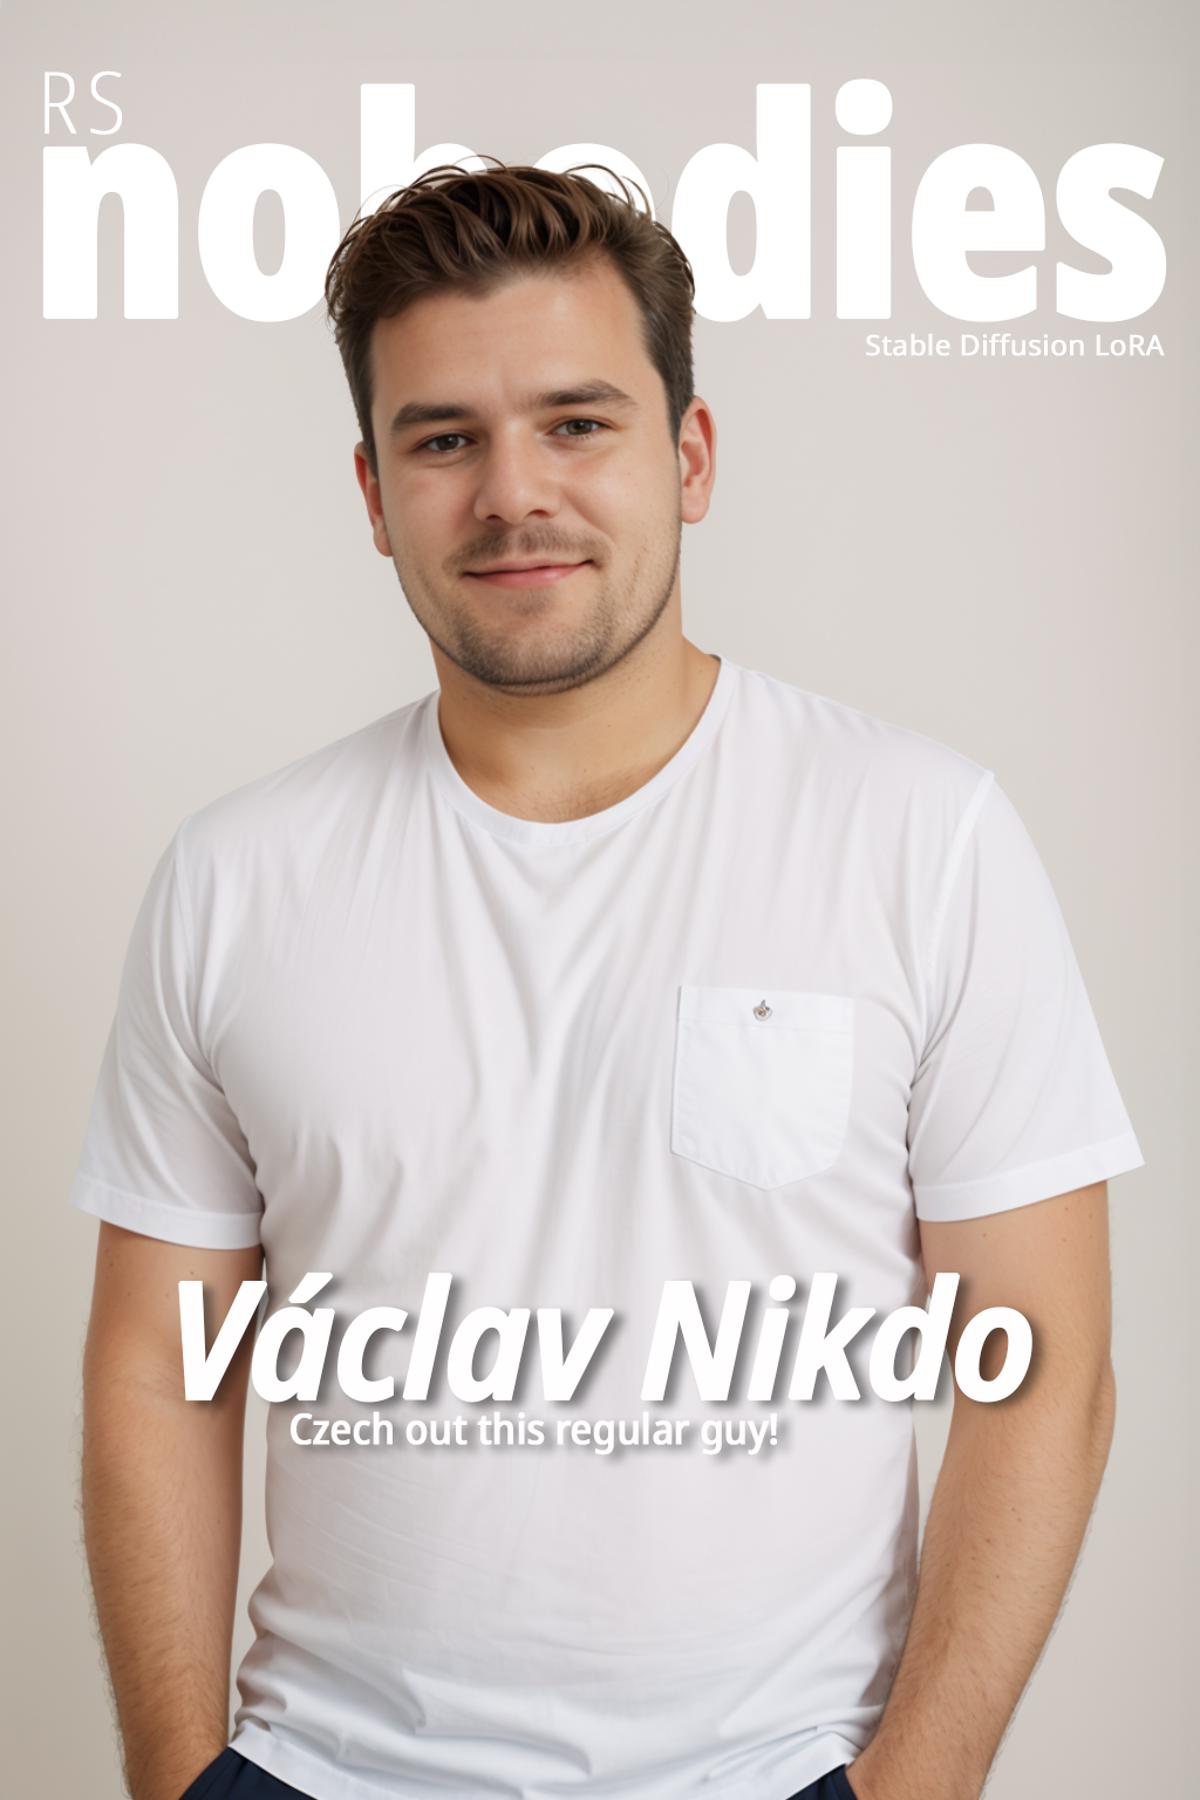 RS Nobodies: Václav Nikdo image by rathersneaky